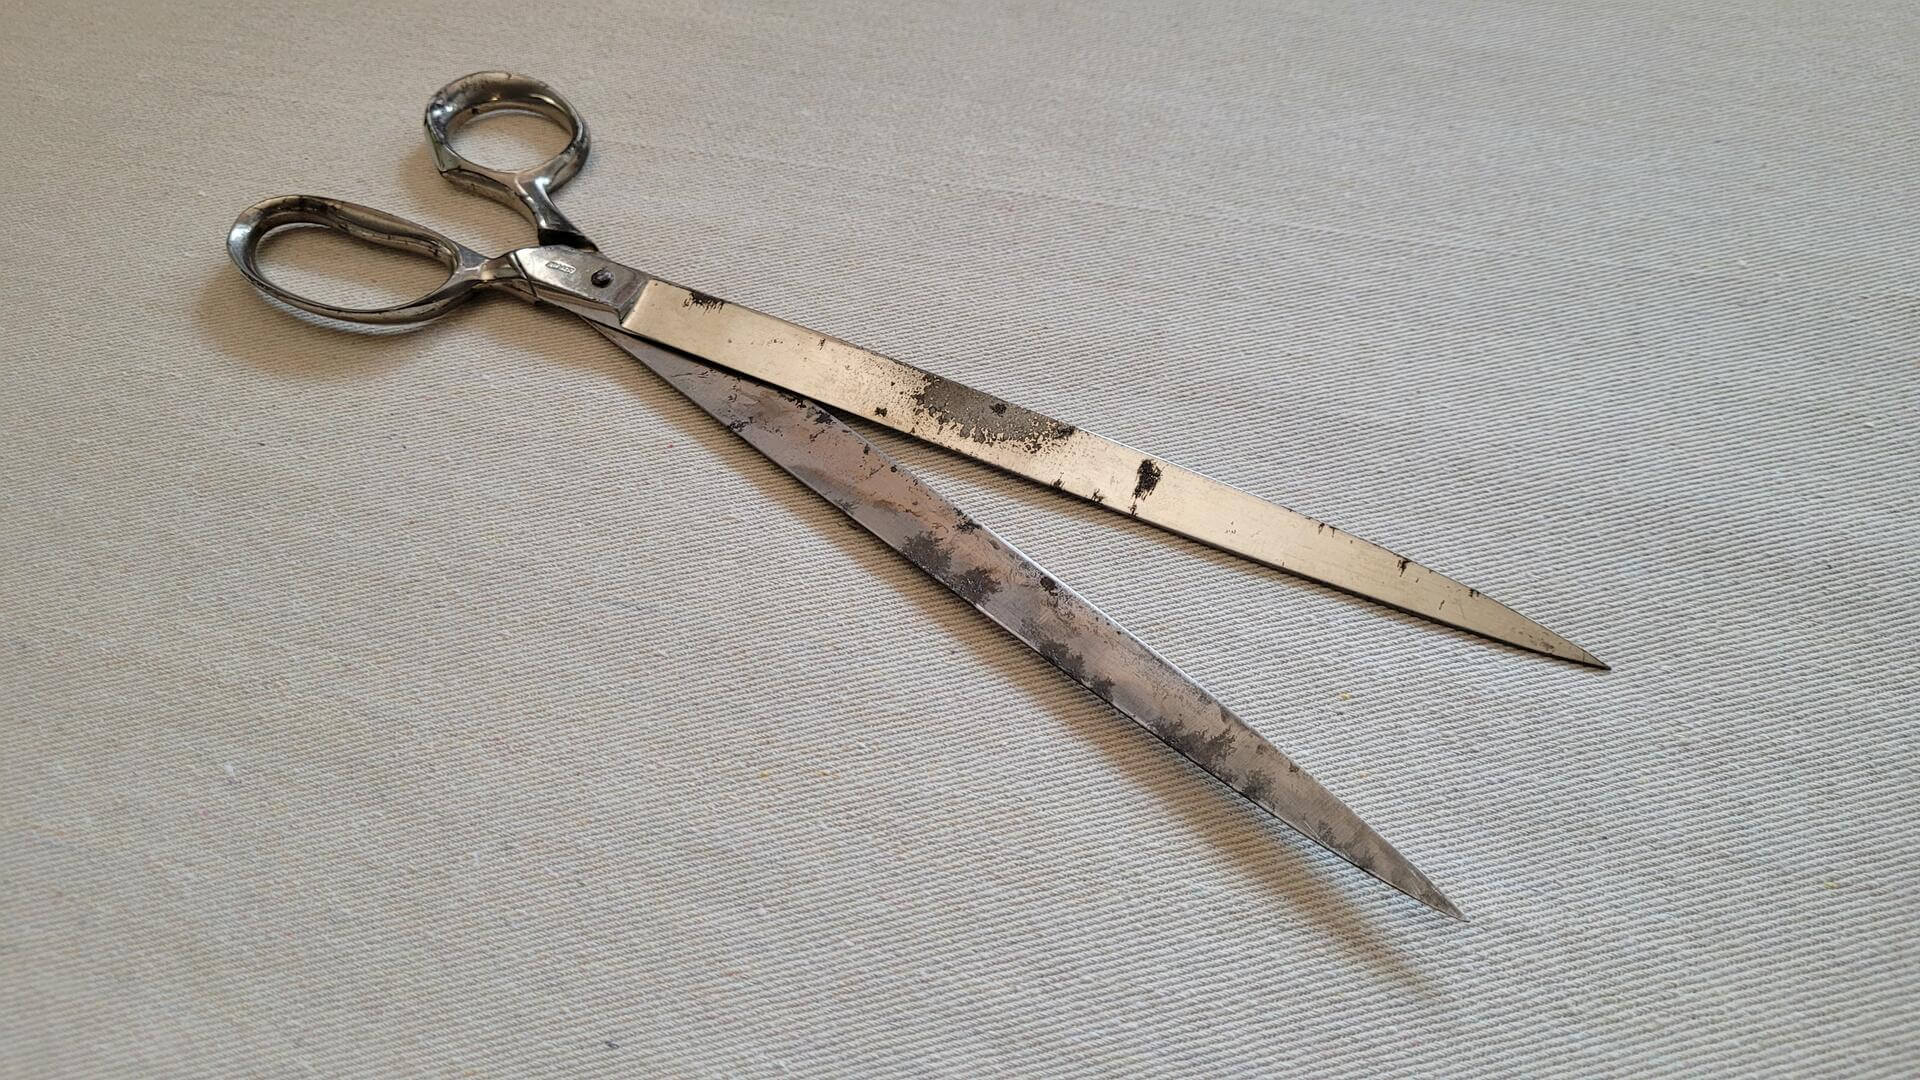 Nice vintage pair of Premier Lifetime Scissors 12.5 inches long. Antique made in Germany collectible tailor and dressmaker fabric cutting tools and shears